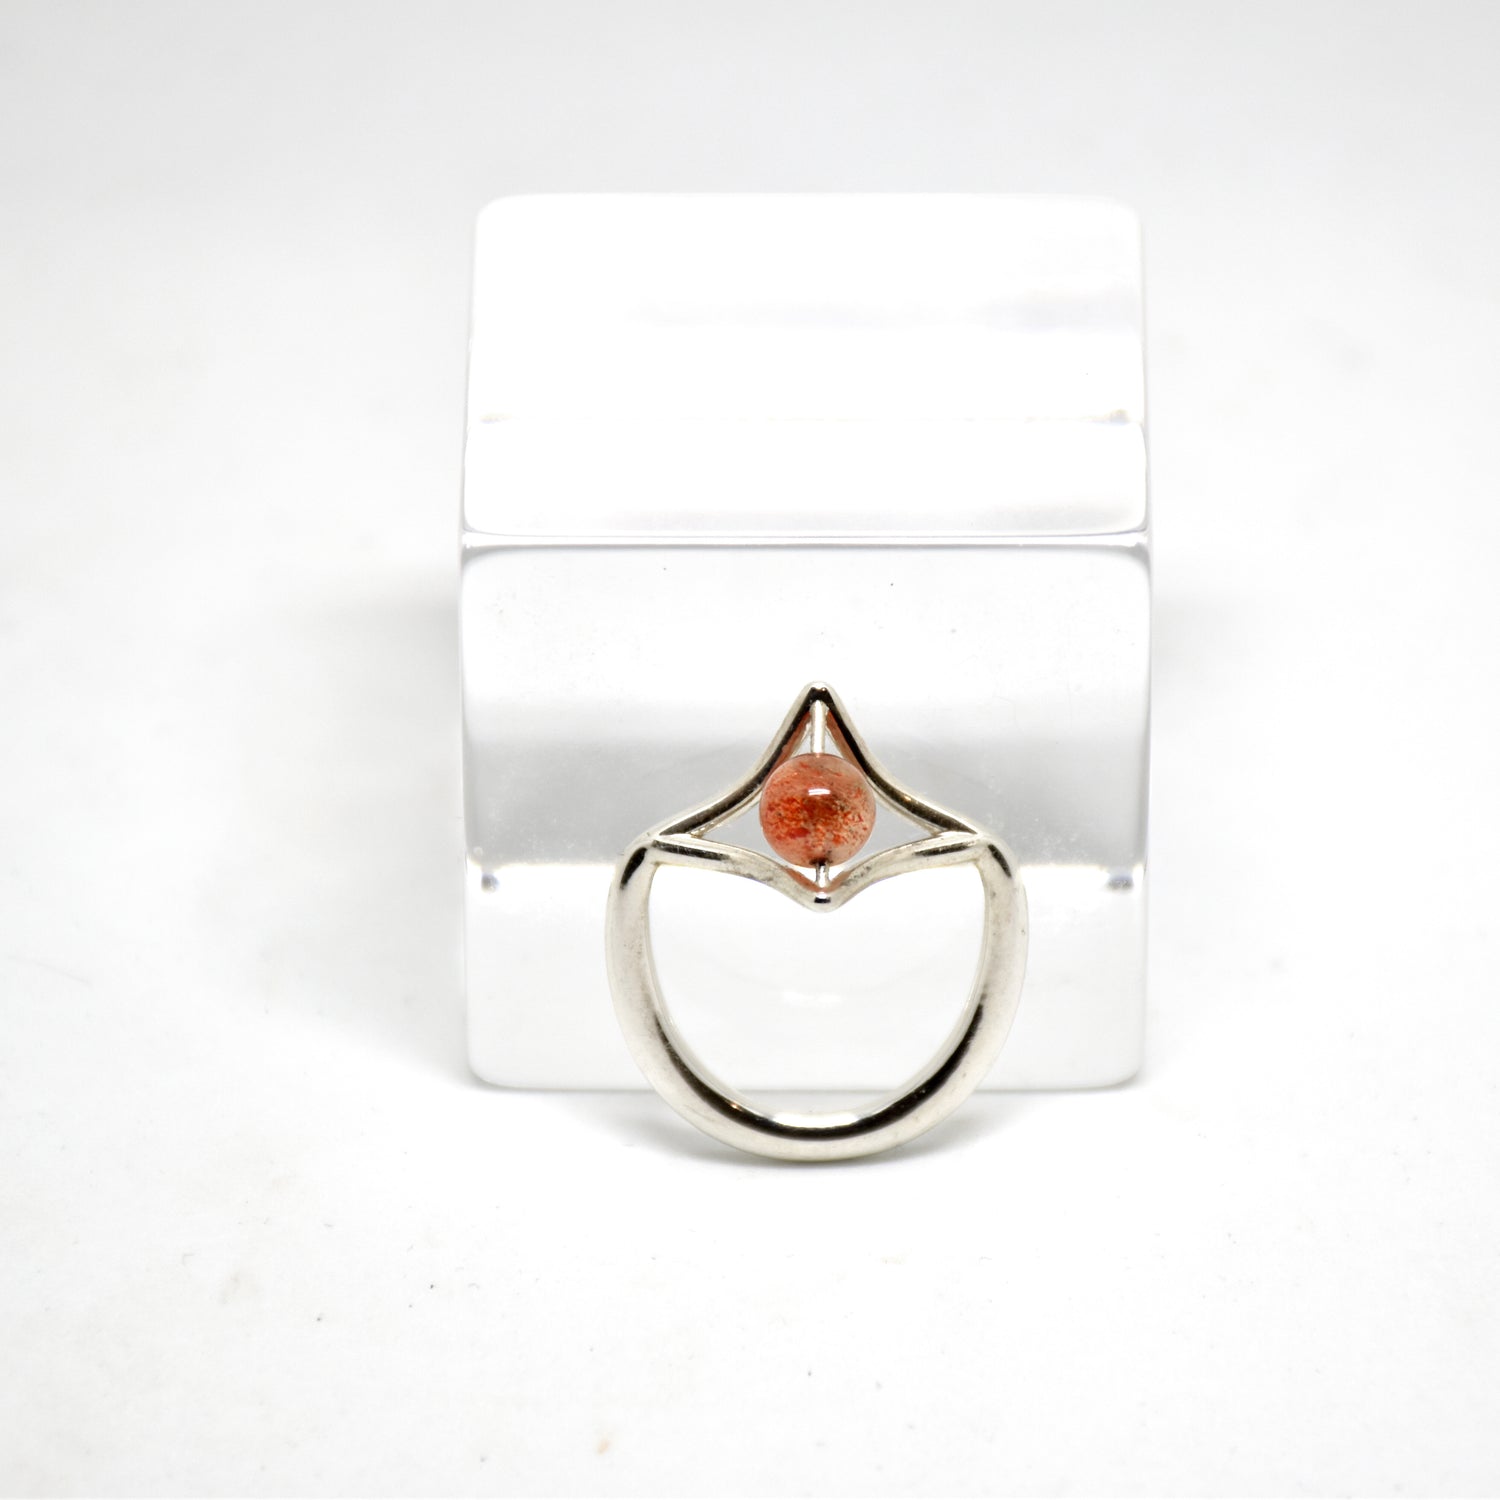 Petal Sterling Silver Ring with Sunstone